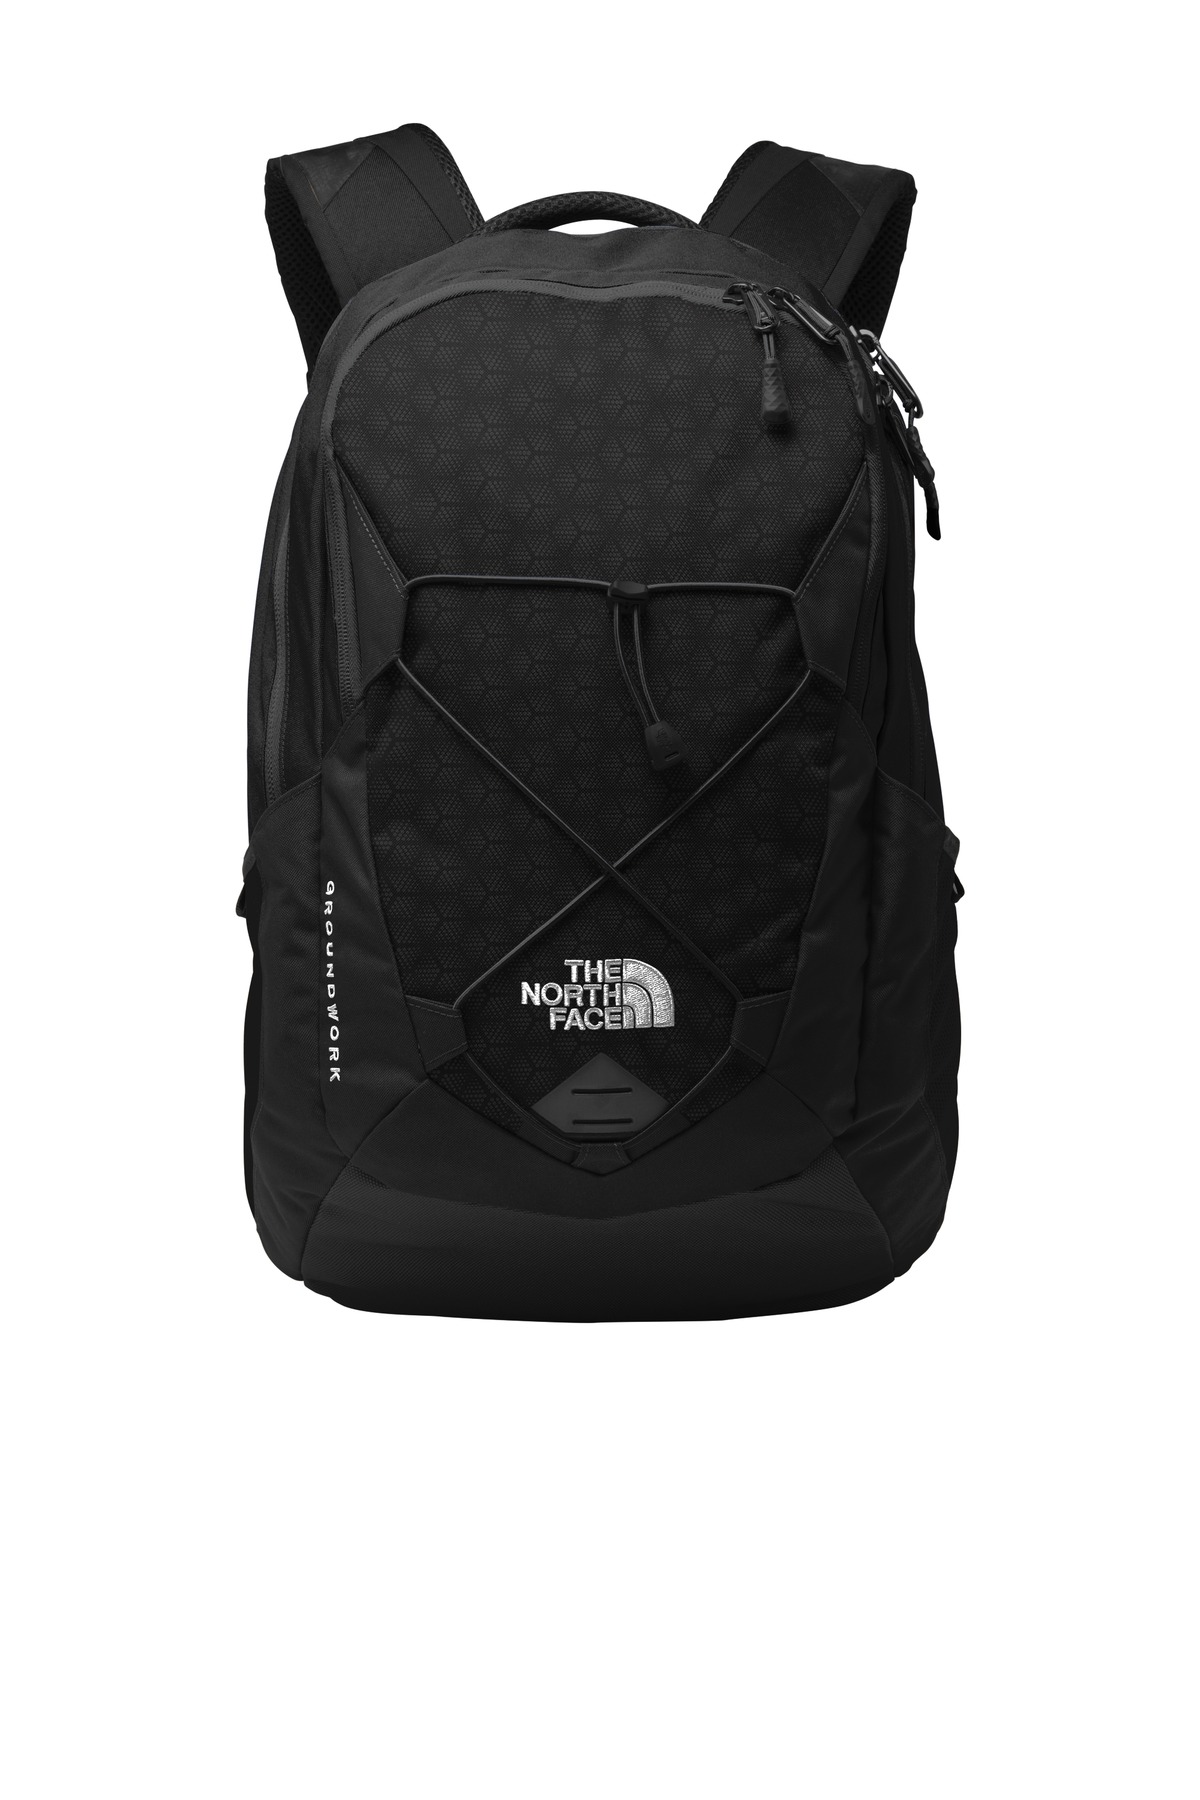 The North Face Groundwork Backpack-The North Face